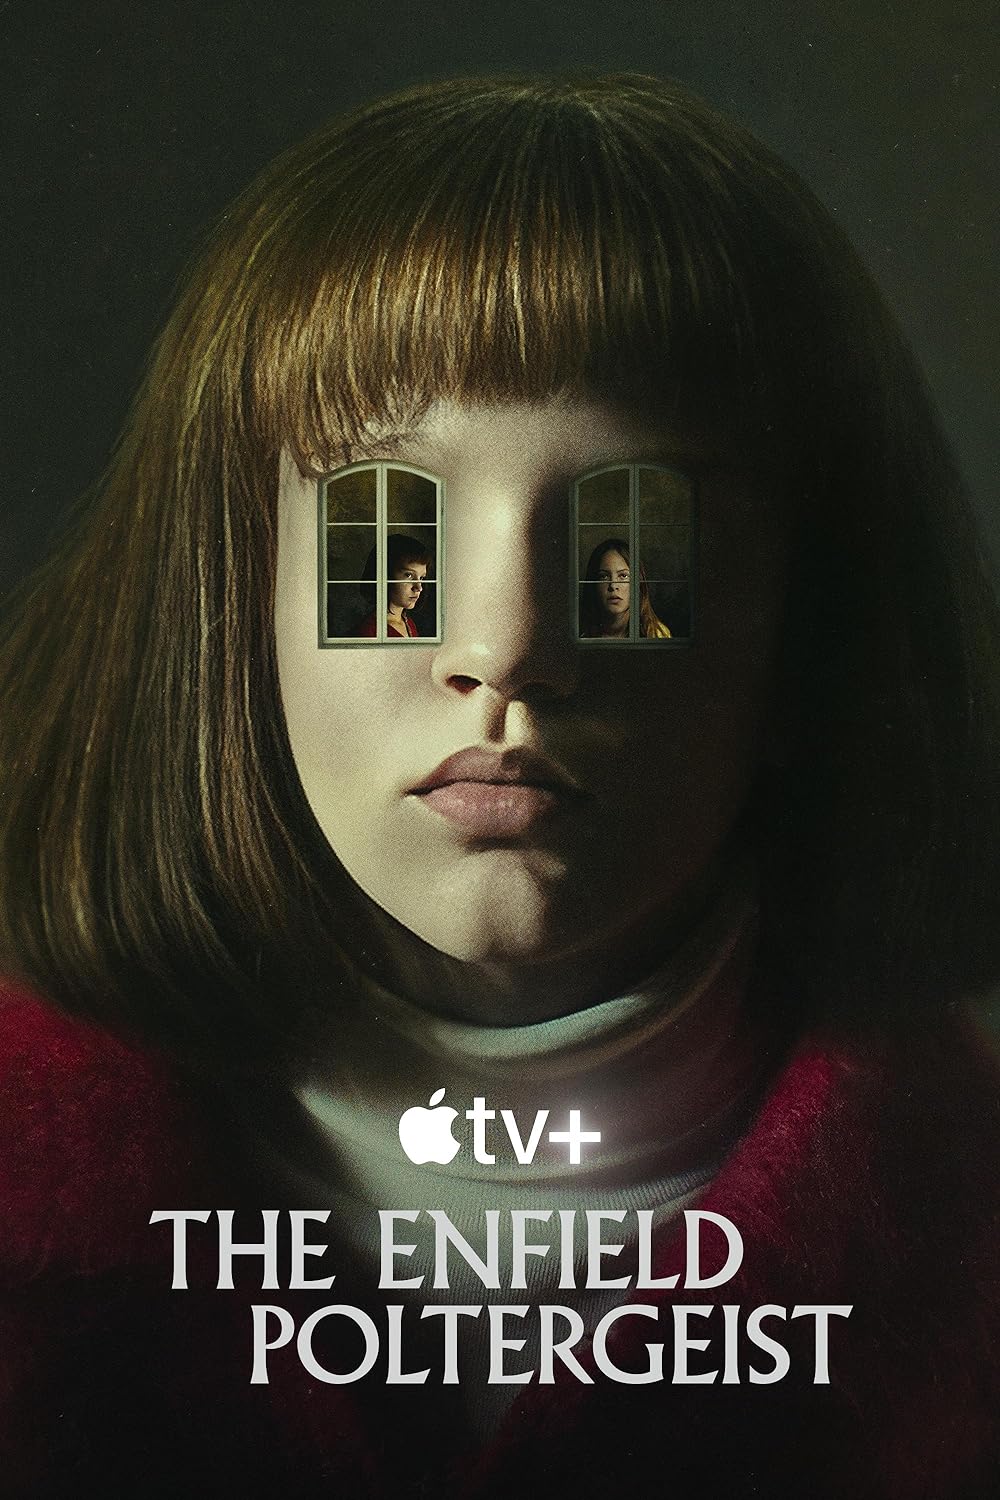 The Enfield Poltergeist (October 28) - Apple TV+
The Enfield Poltergeist is a gripping four-episode documentary that delves deep into a family's supernatural encounter in 1970s London. Drawing from extensive audio tapes and candid interviews with key figures, this documentary paints a vivid picture of the chilling events. The Enfield haunting's influence extends to Hollywood, inspiring the 2016 horror blockbuster 